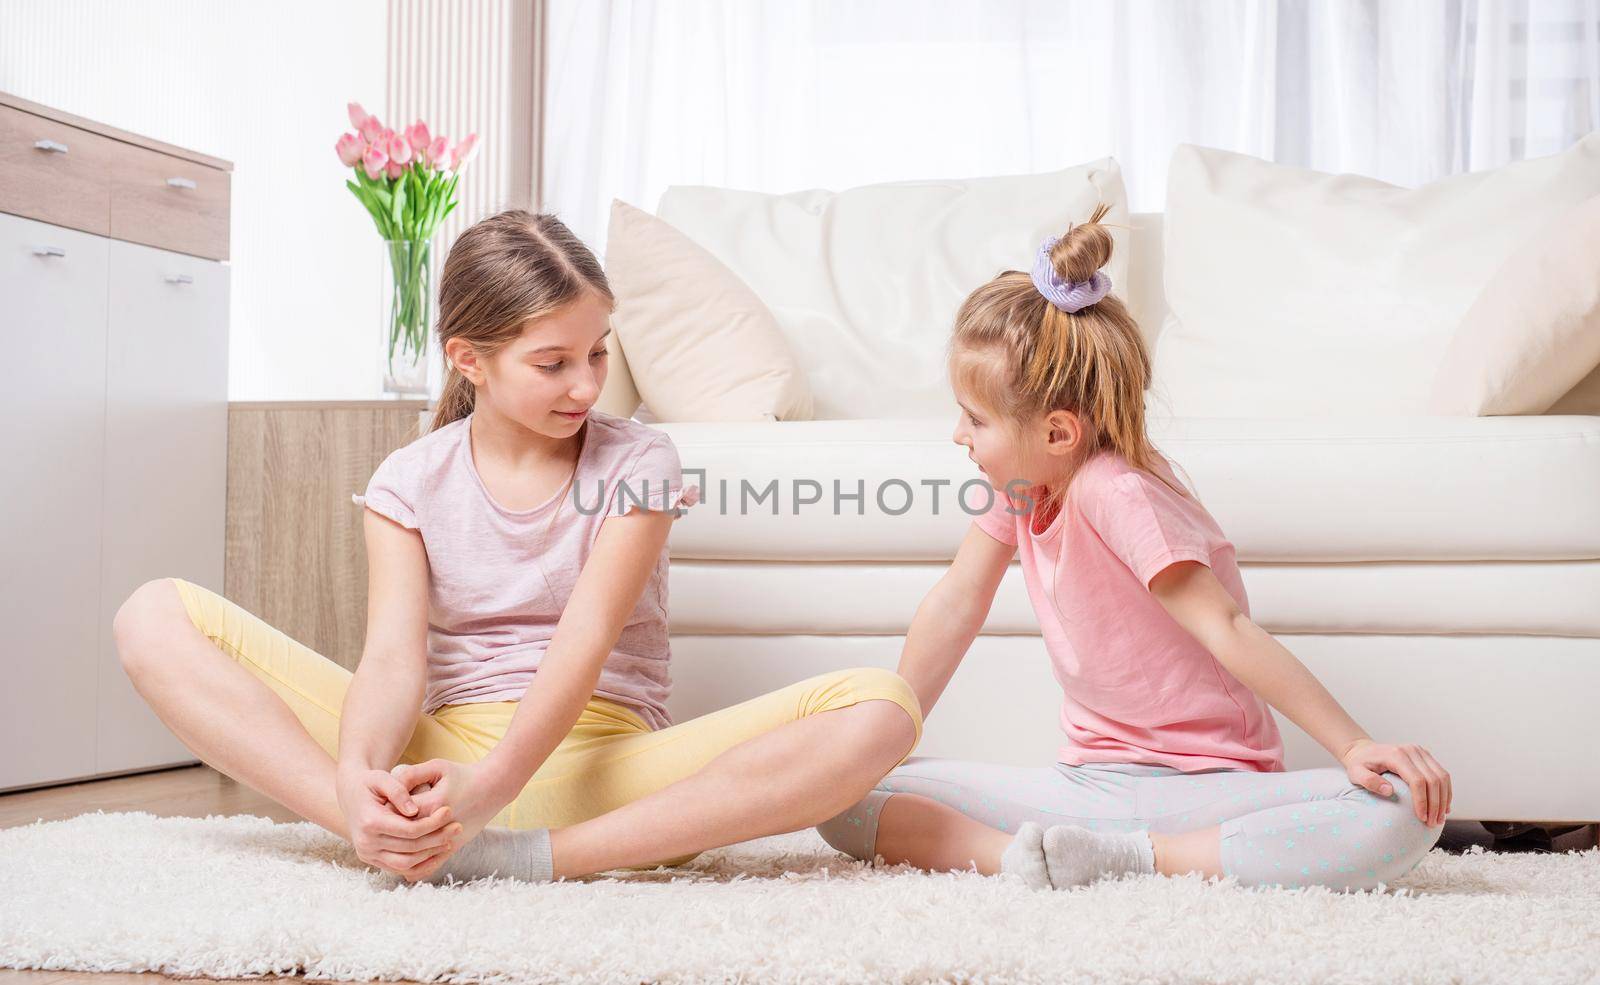 Two yoga-practicing girls are meditating with joy at home